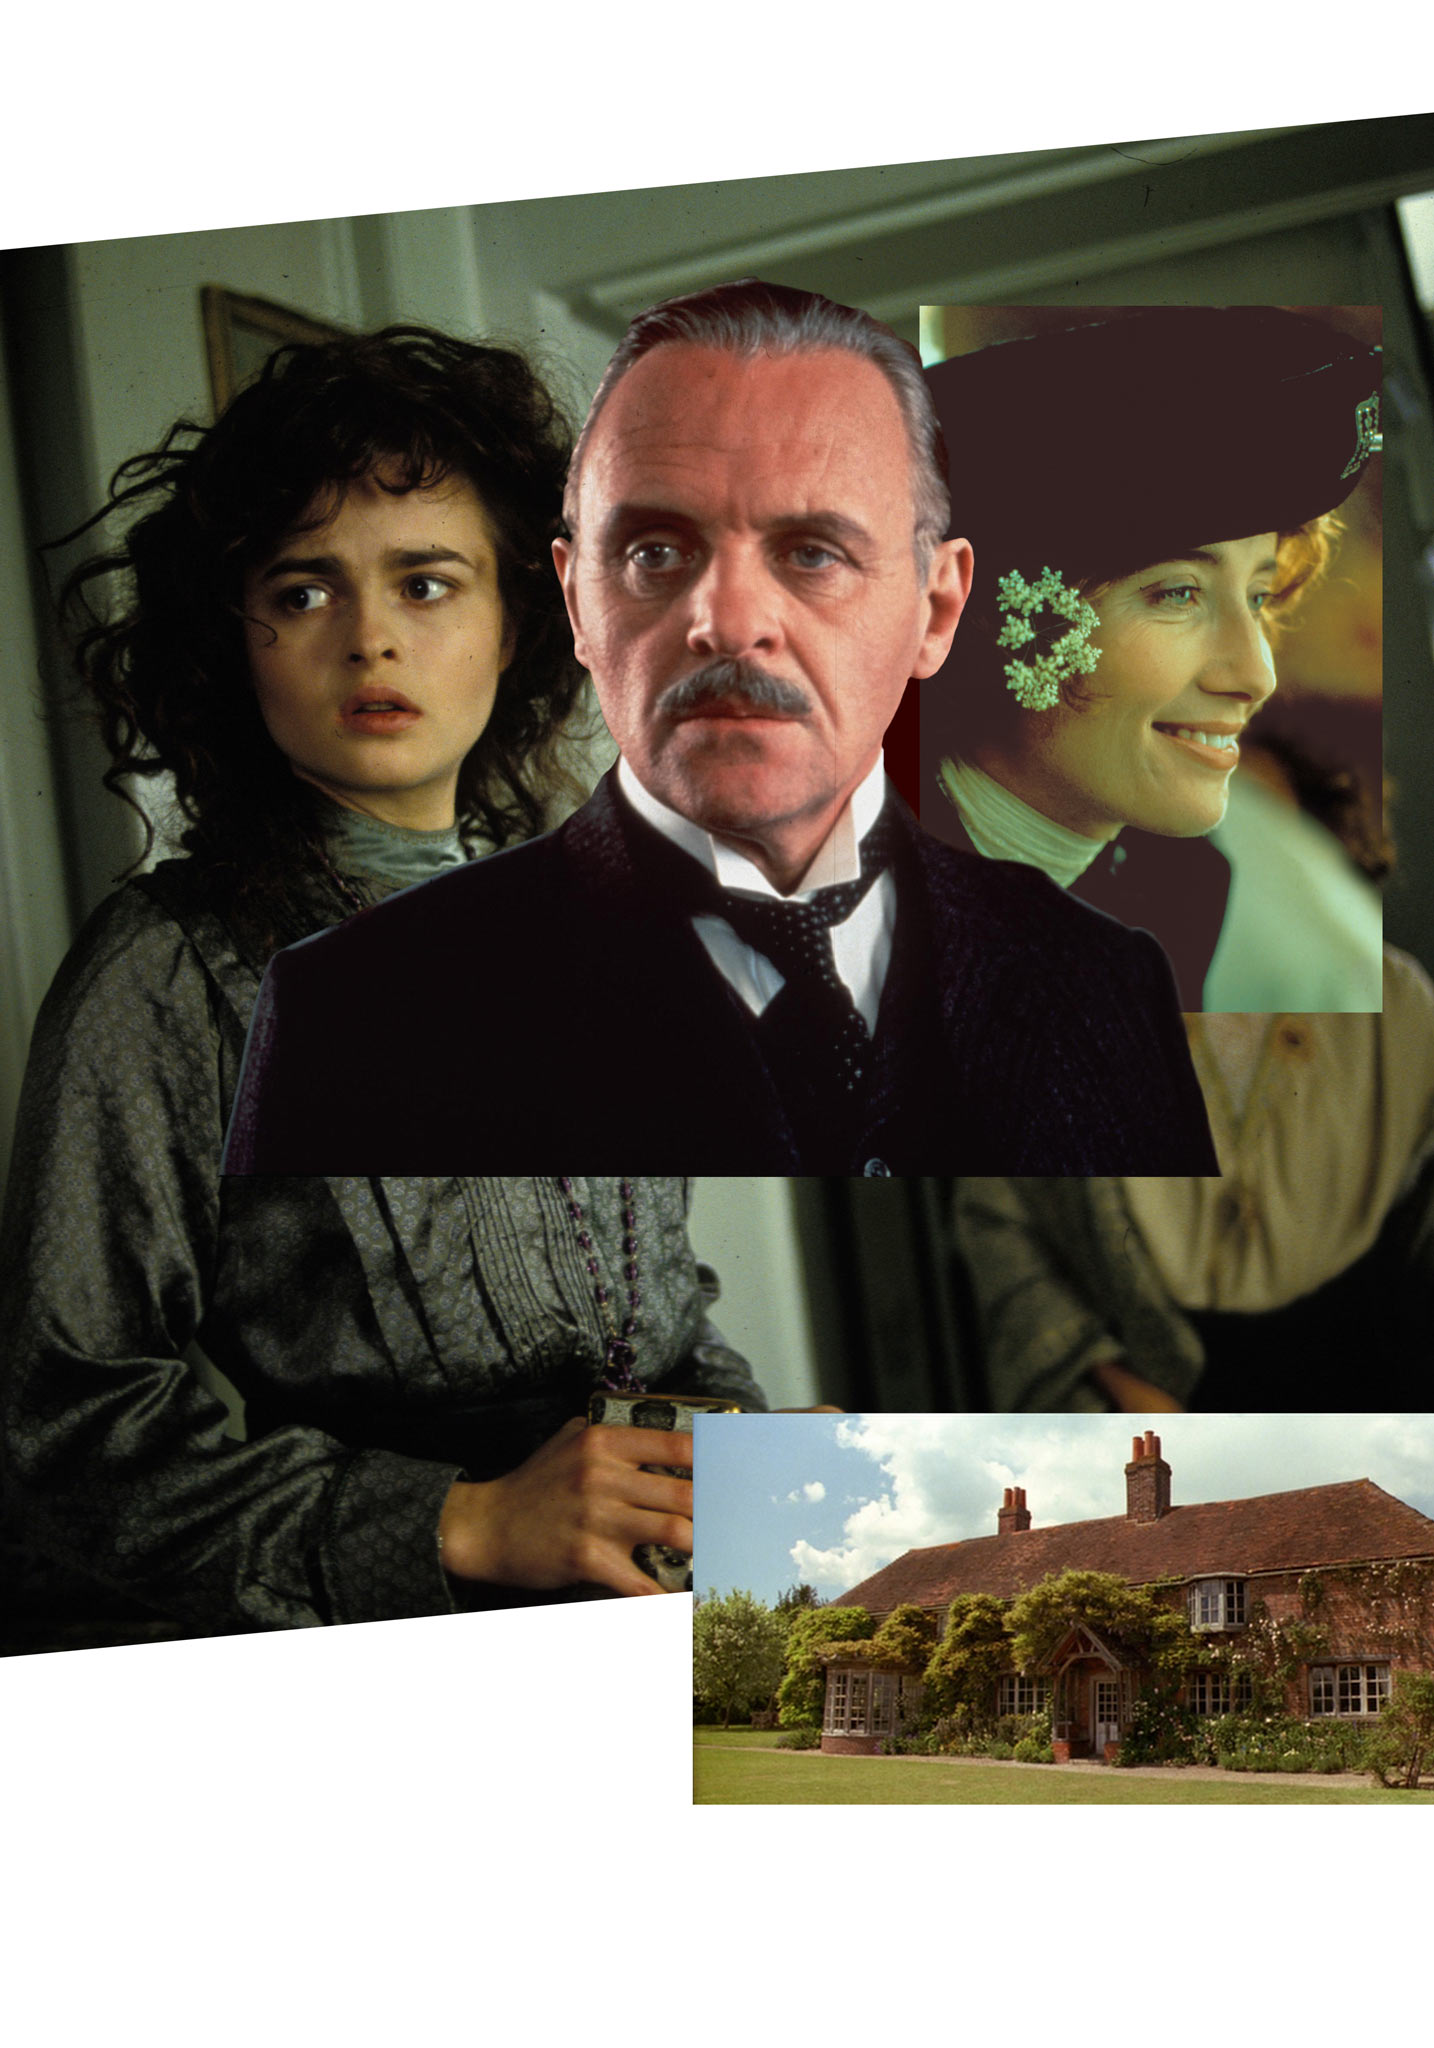 Howards End (1992) before